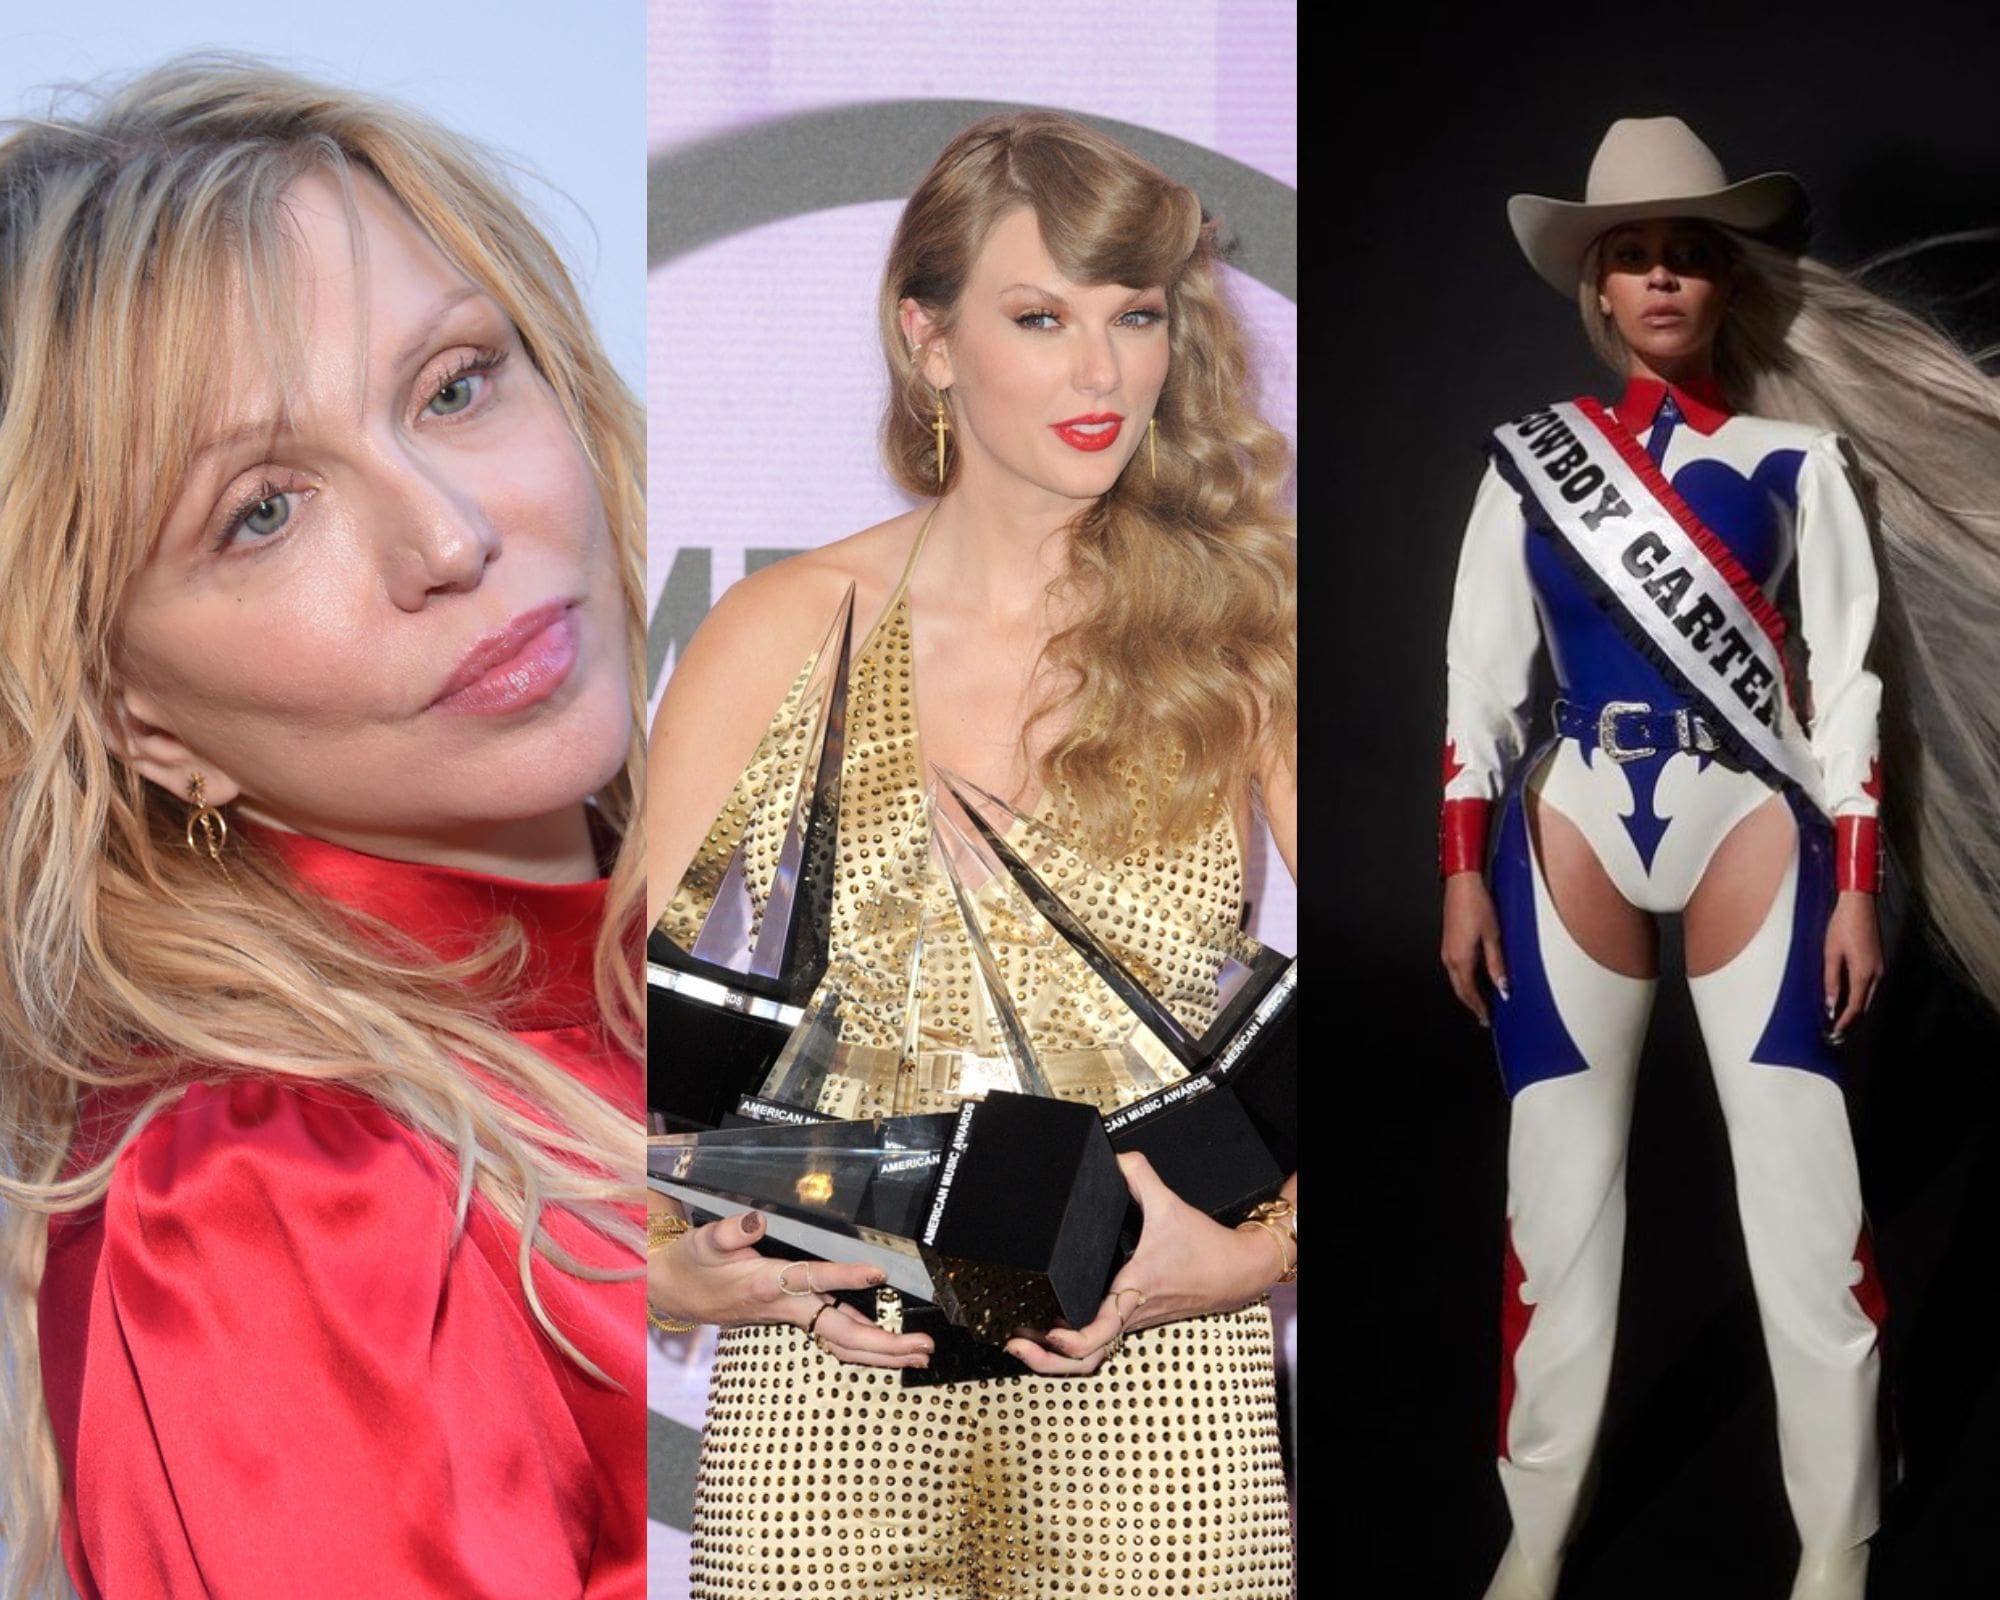 Courtney Love Absolutely Roasted Taylor Swift and Beyonce